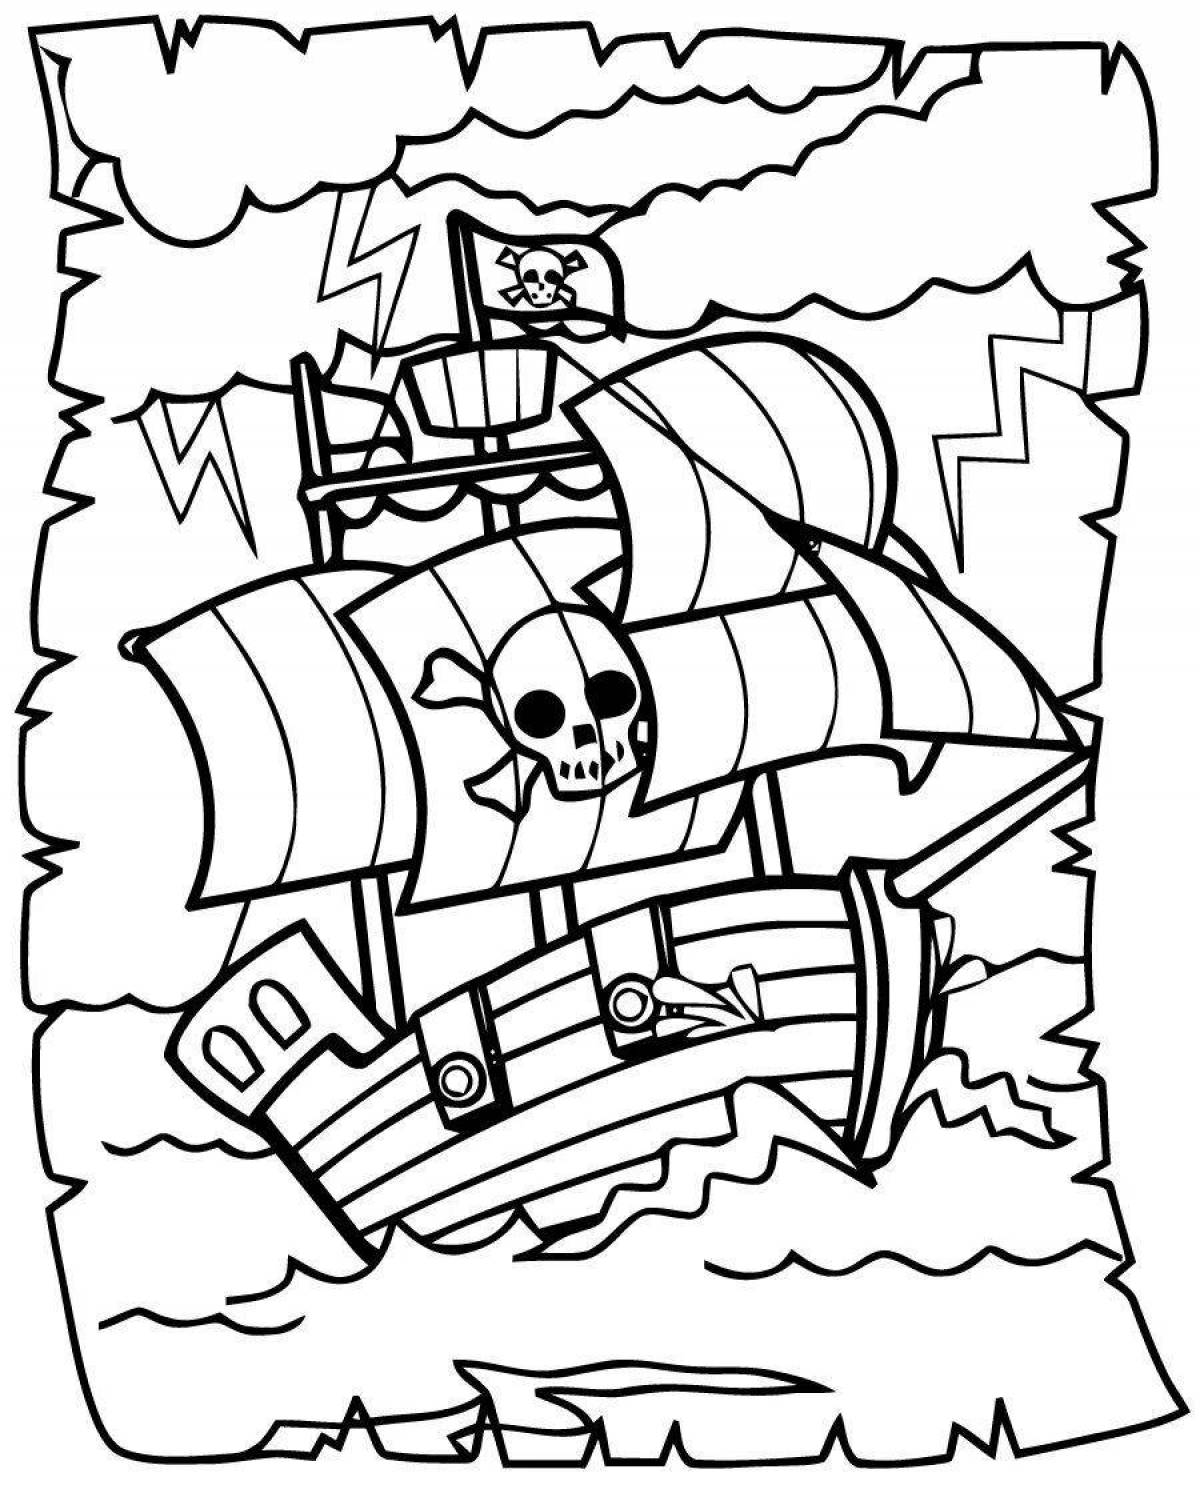 Awesome pirate ship coloring page for kids